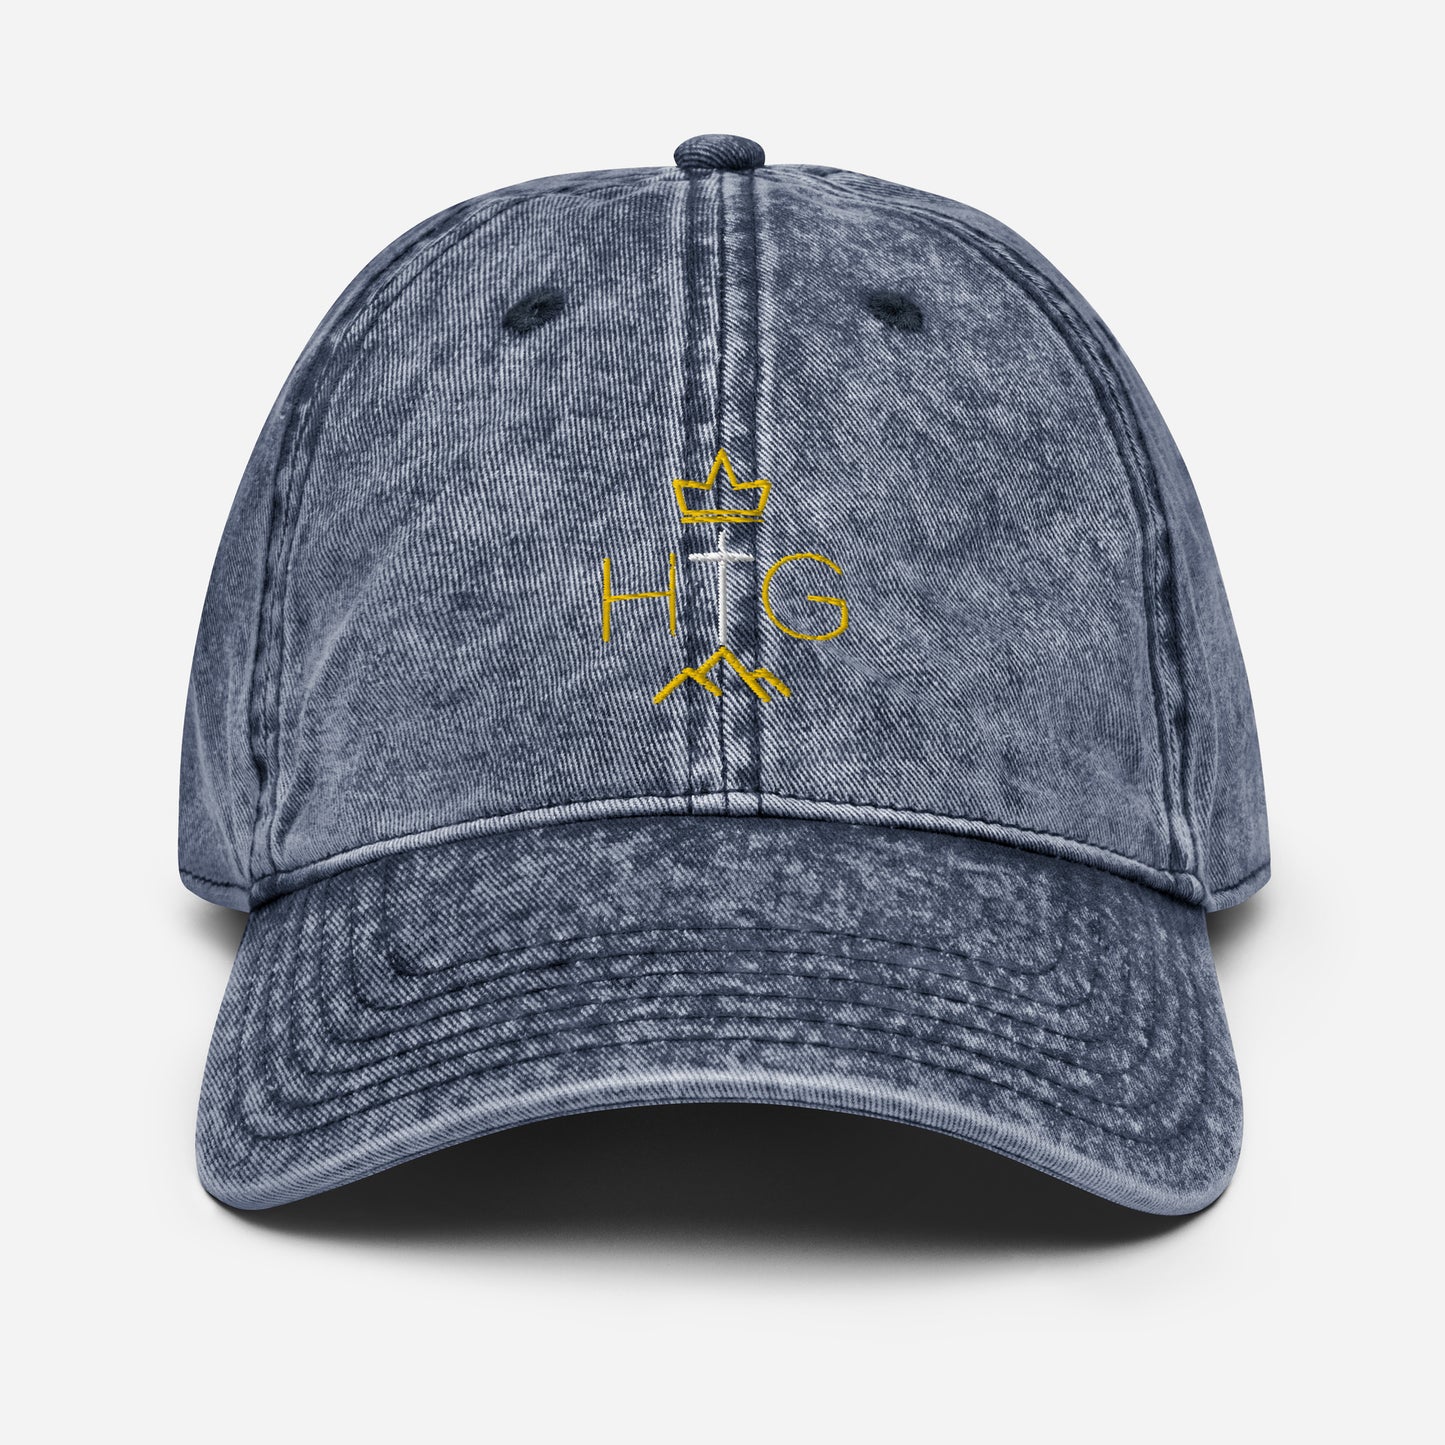 His Glory - Official Logo - Vintage Cotton Twill Cap